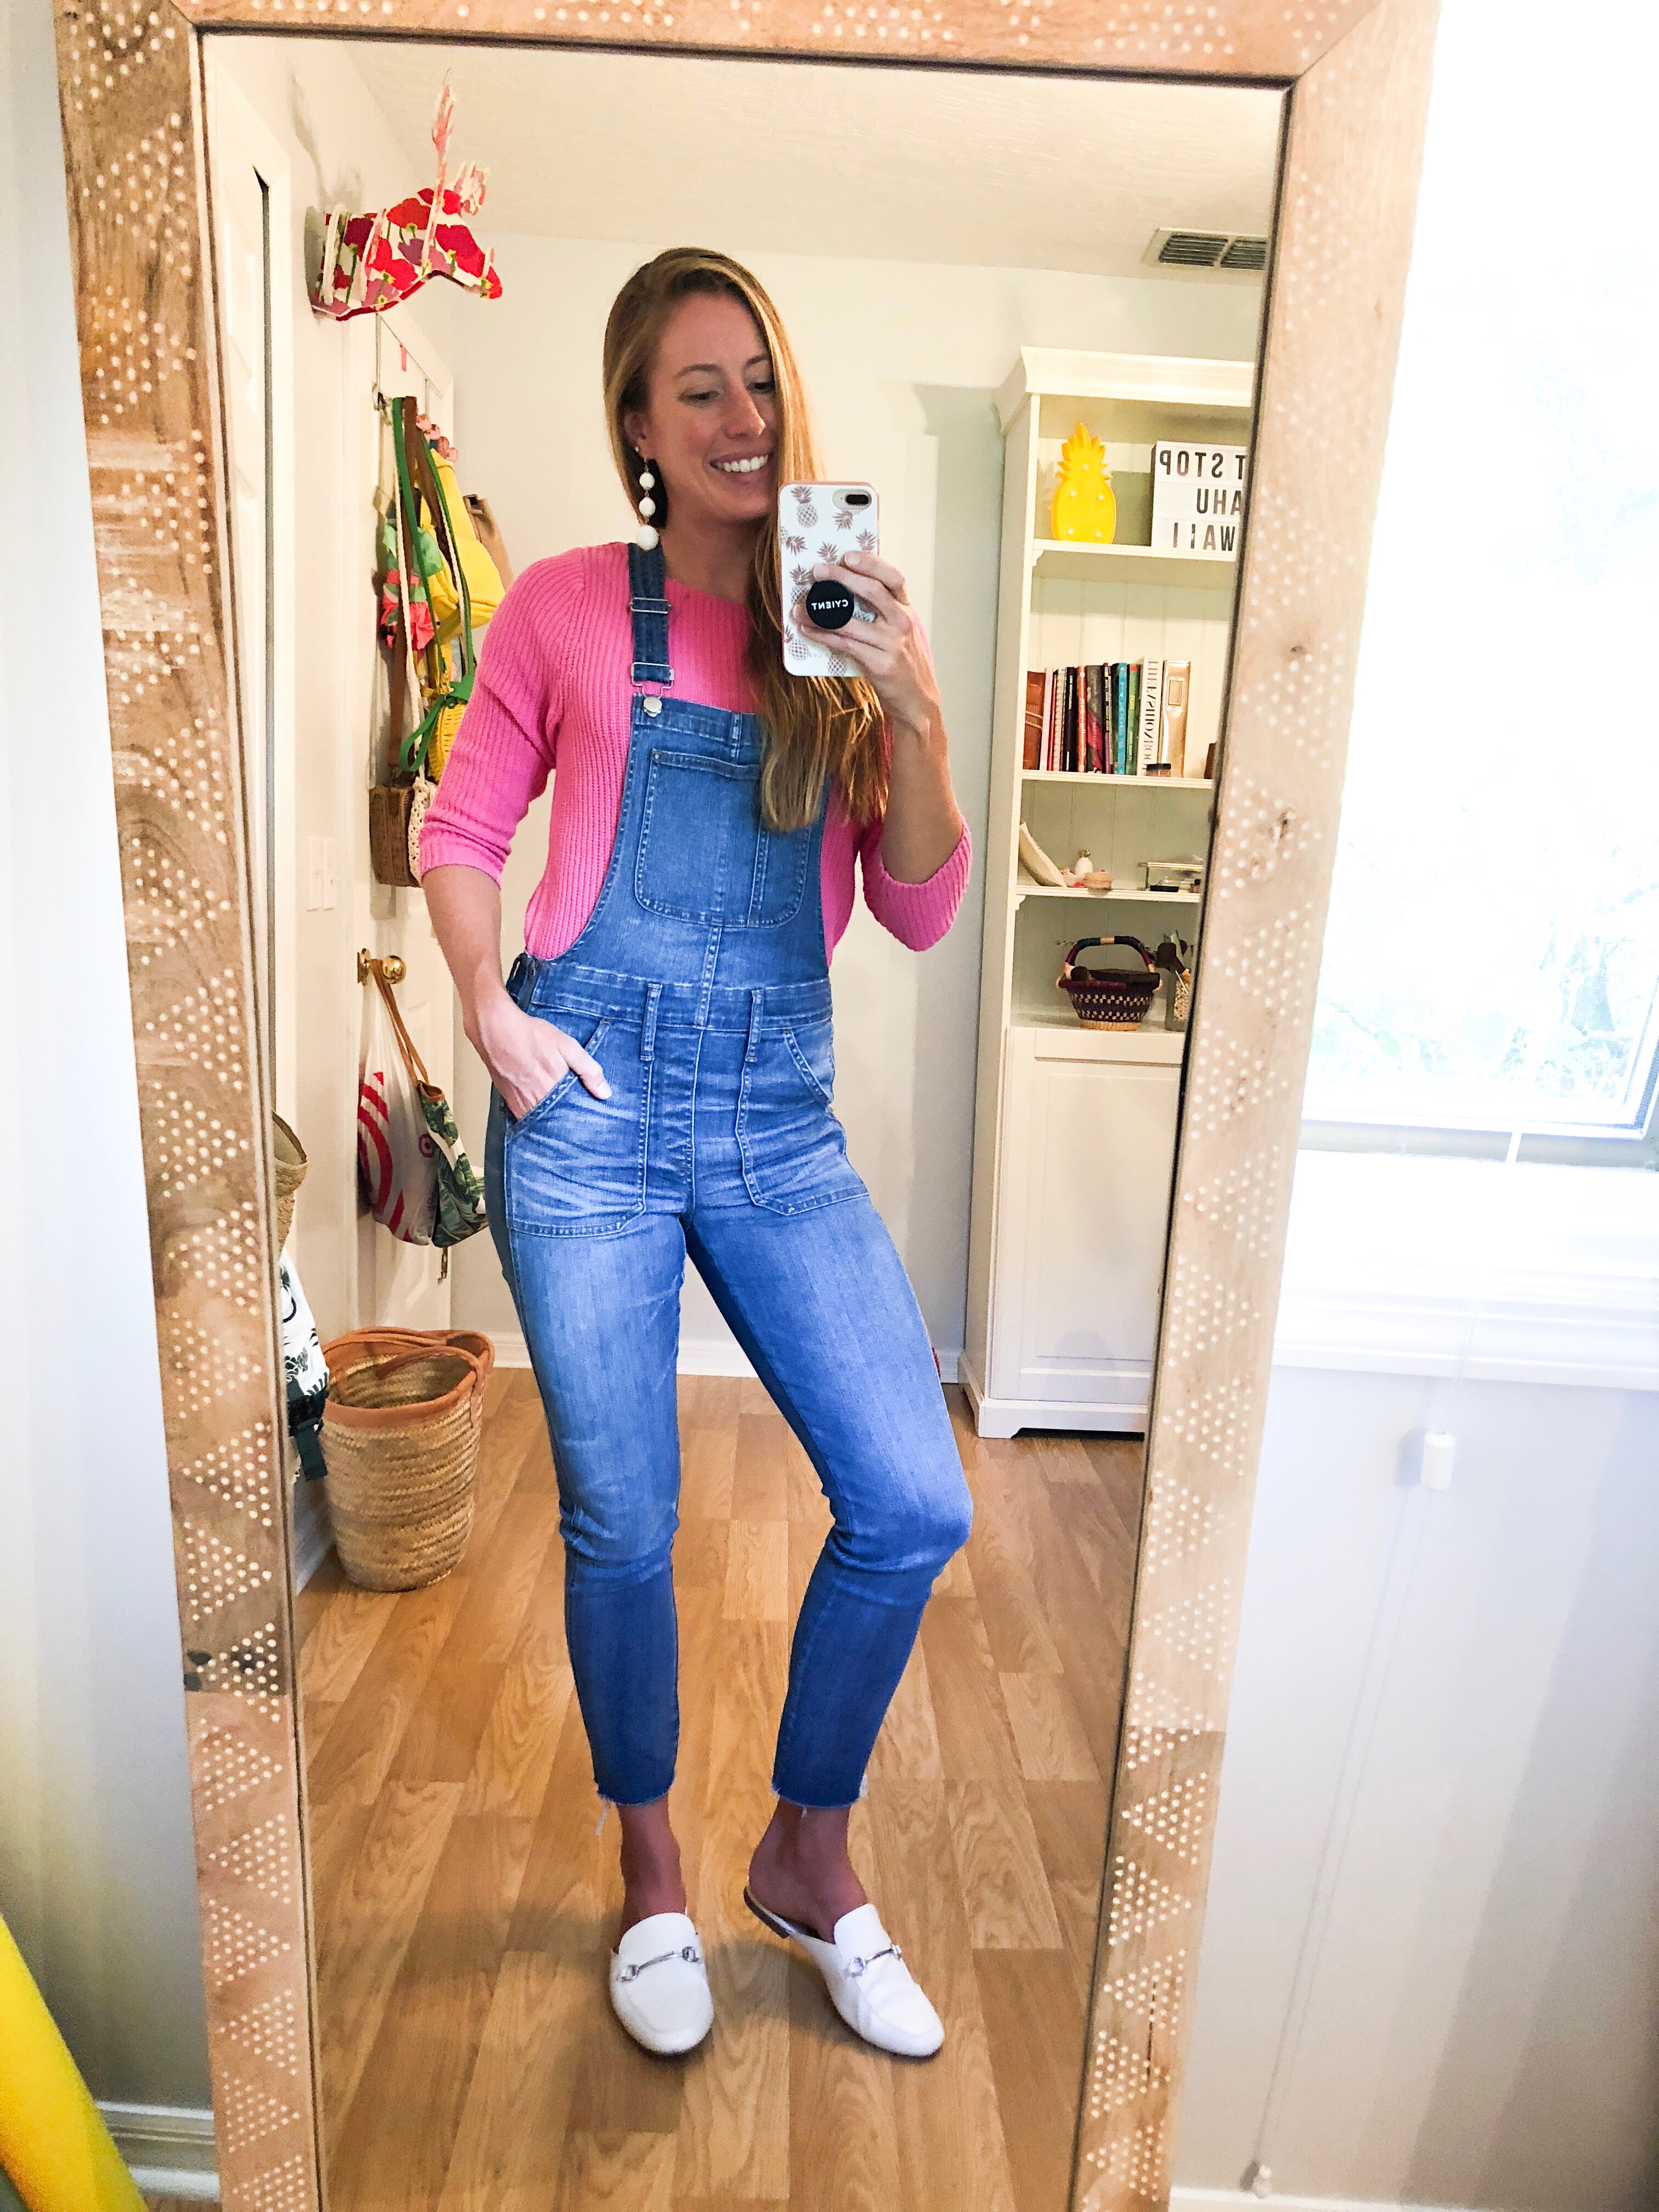 3 Ways to Style Overalls for Fall - Striped Top, Colored Sweater and a Blouse | Sunshine Style